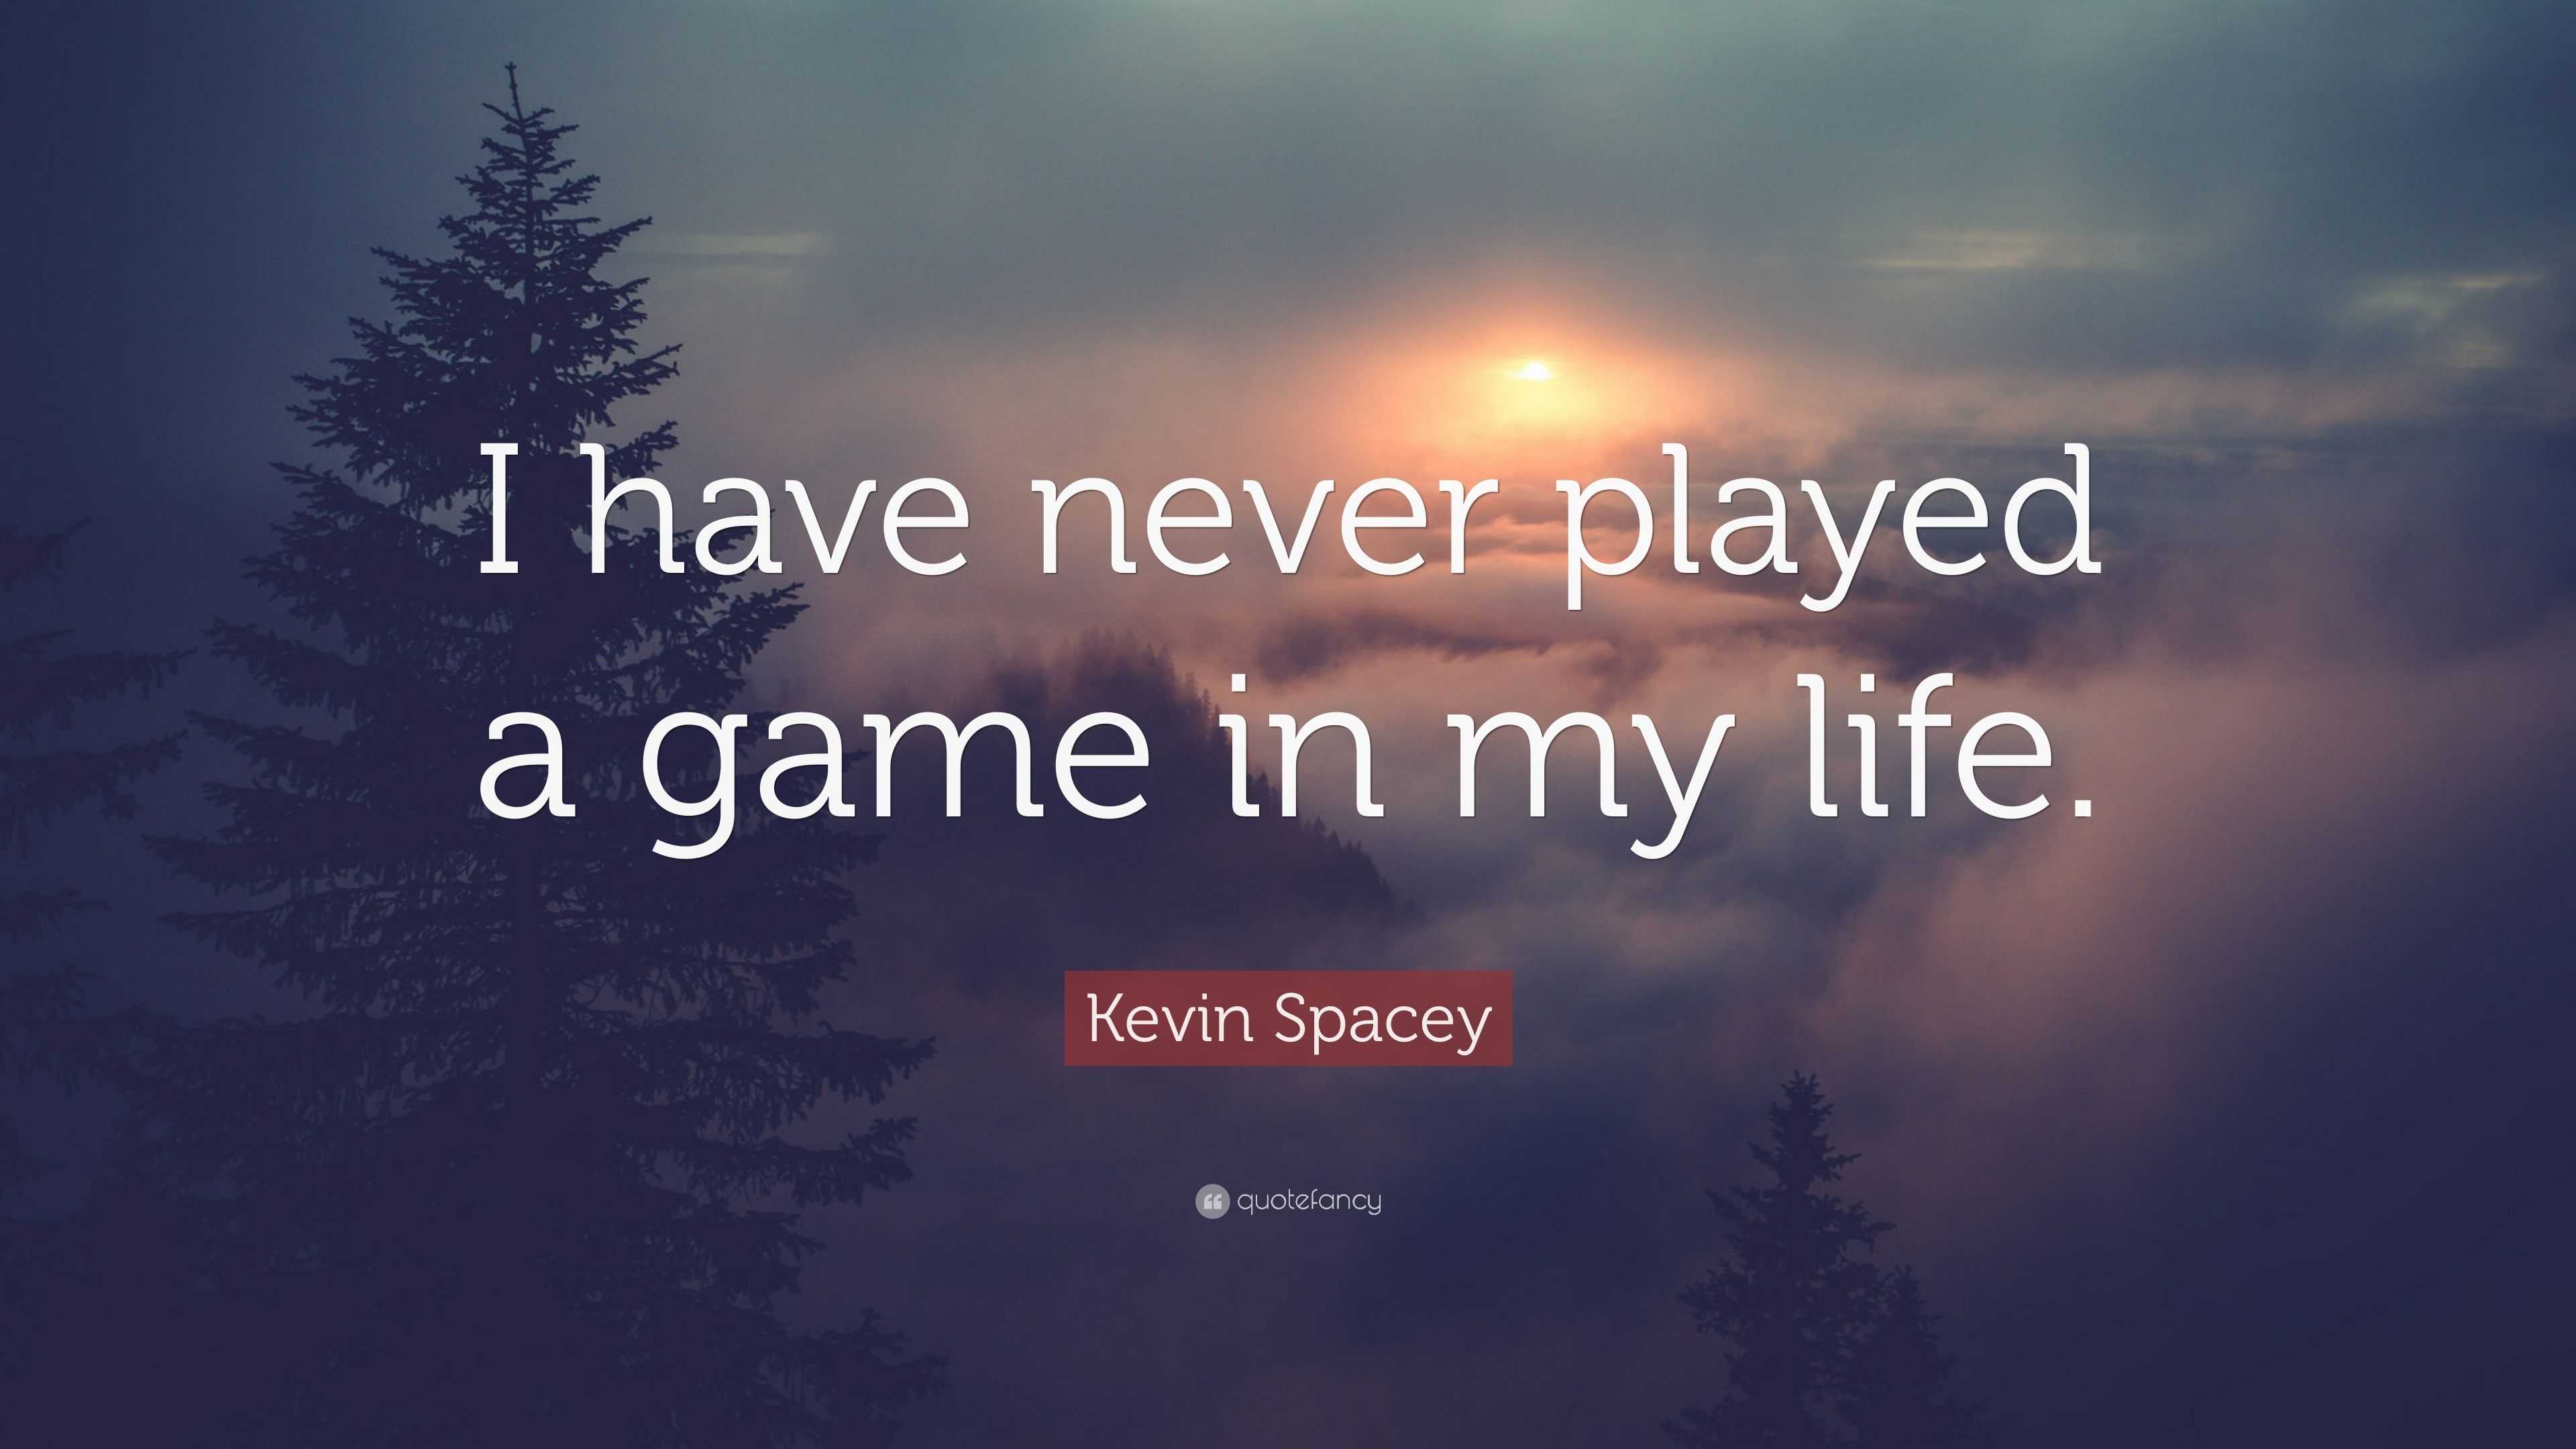 Kevin Spacey Quote I Have Never Played A Game In My Life 7 Wallpapers Quotefancy